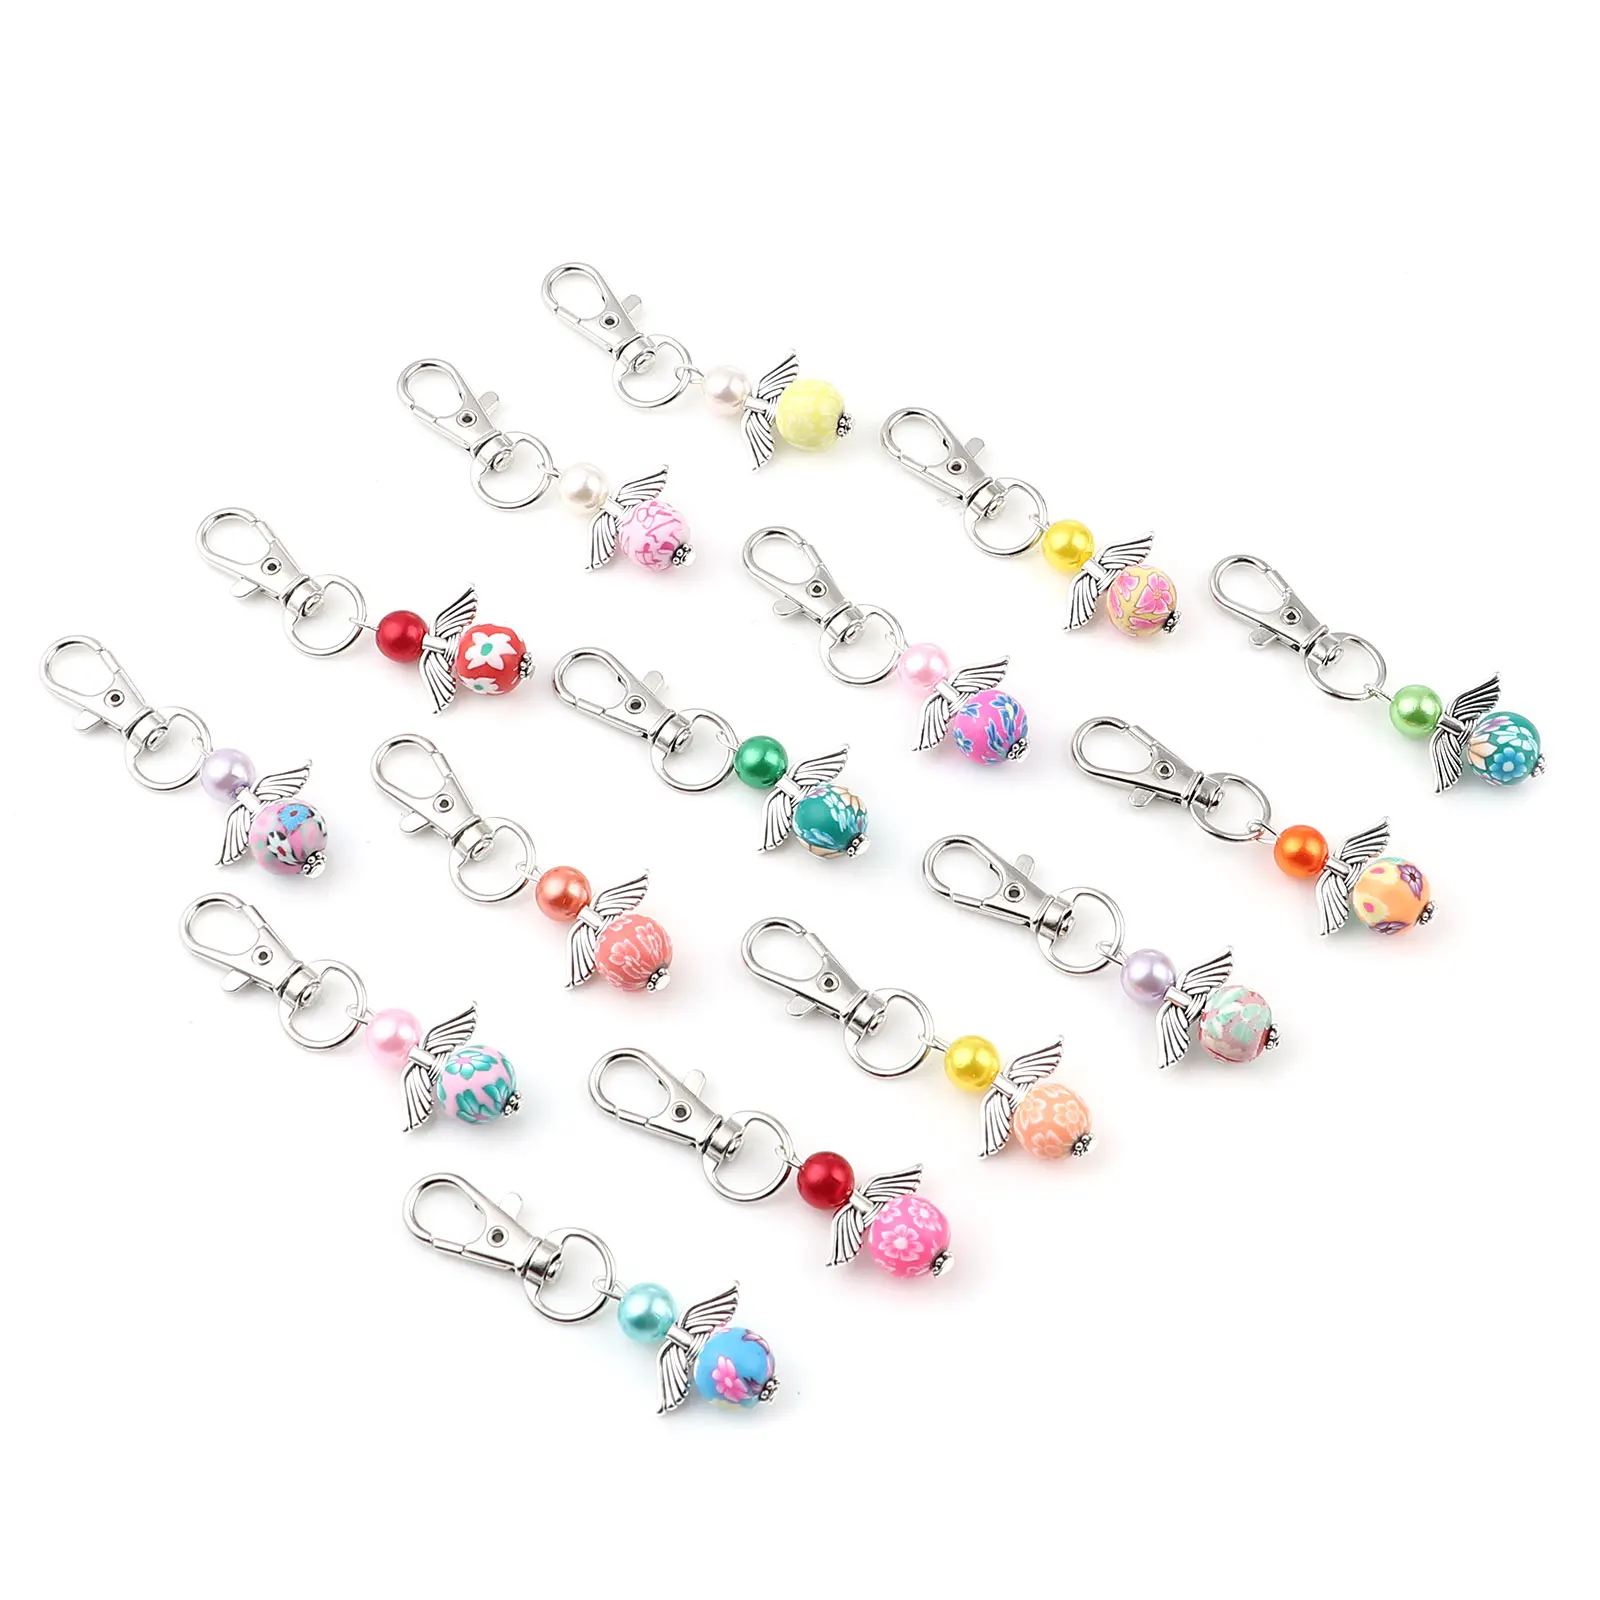 5PCs Zinc Based Alloy Angle Knitting Stitch Markers Charms Wing Pearlized Silver Color Setting Fuchsia Glitter 60mm29mm x 25mm